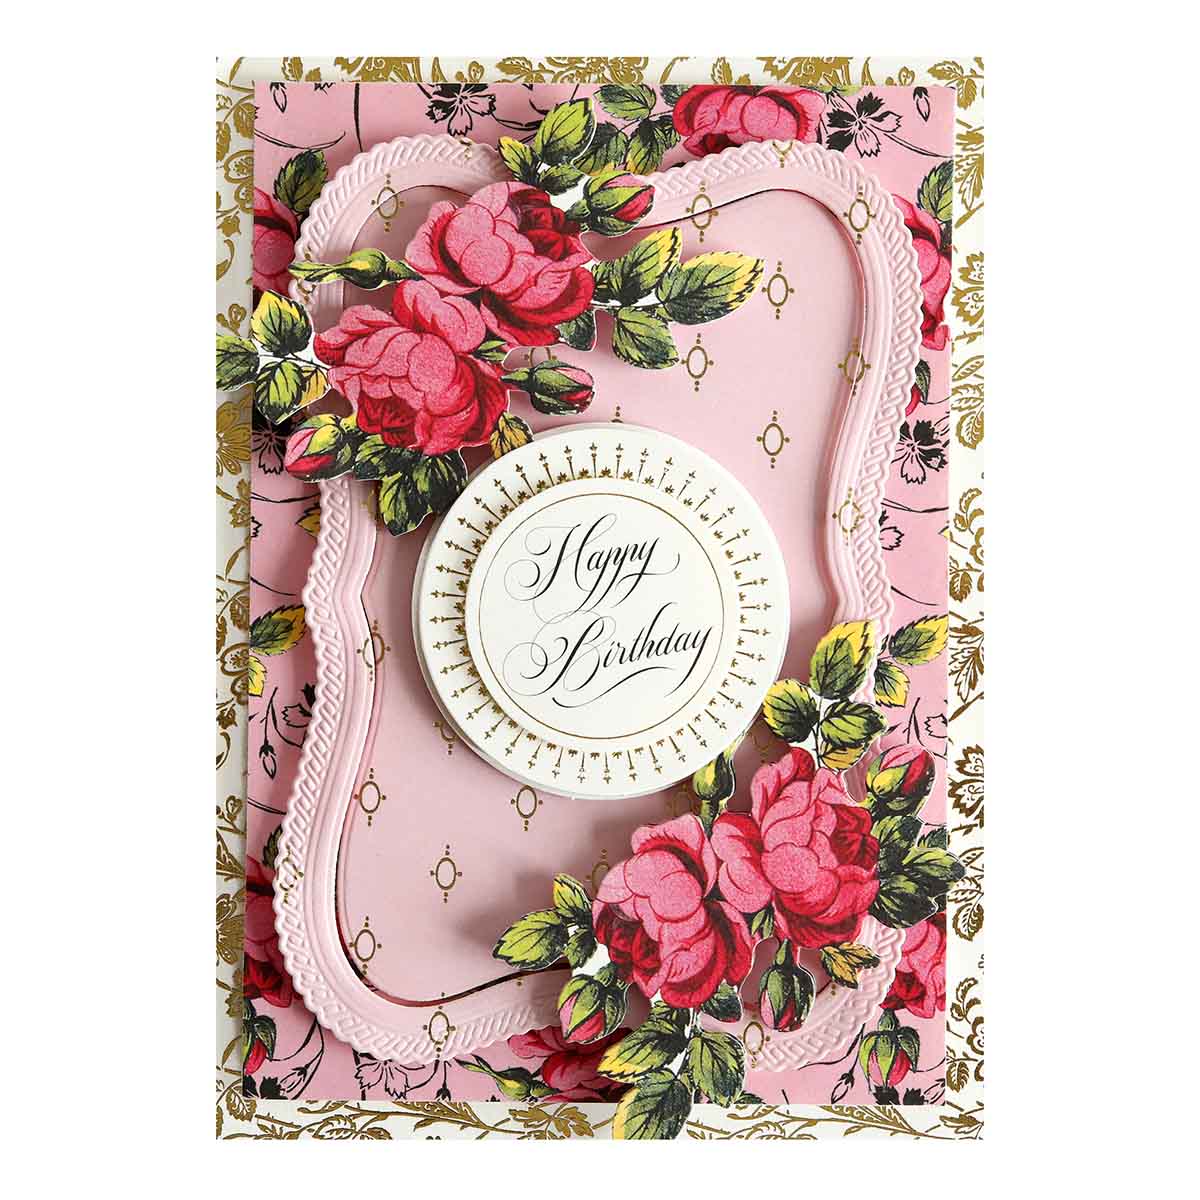 a birthday card with pink roses on a pink background.